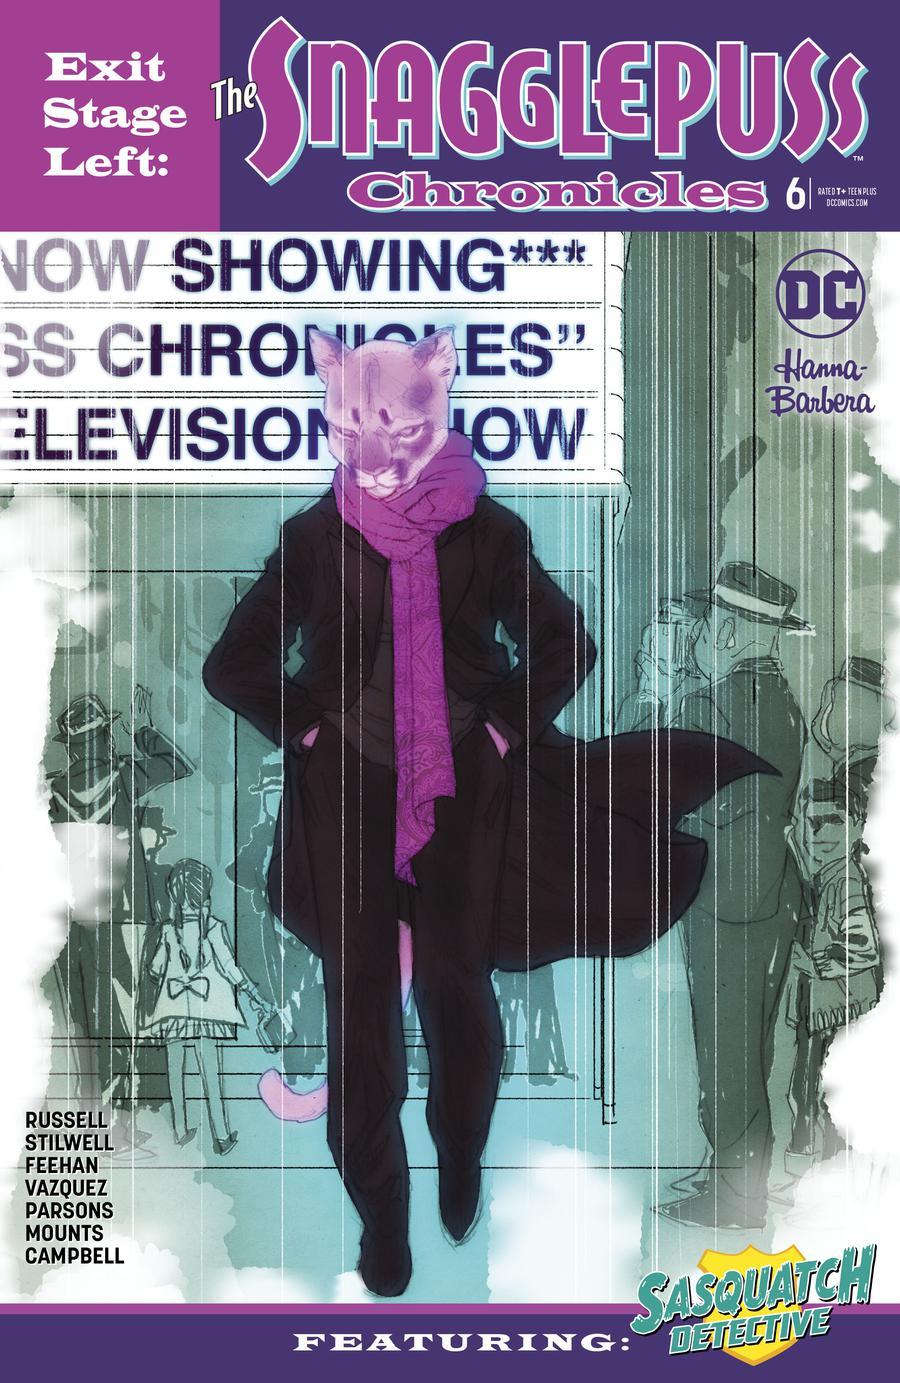 Exit Stage Left The Snagglepuss Chronicles Vol. 1 #6